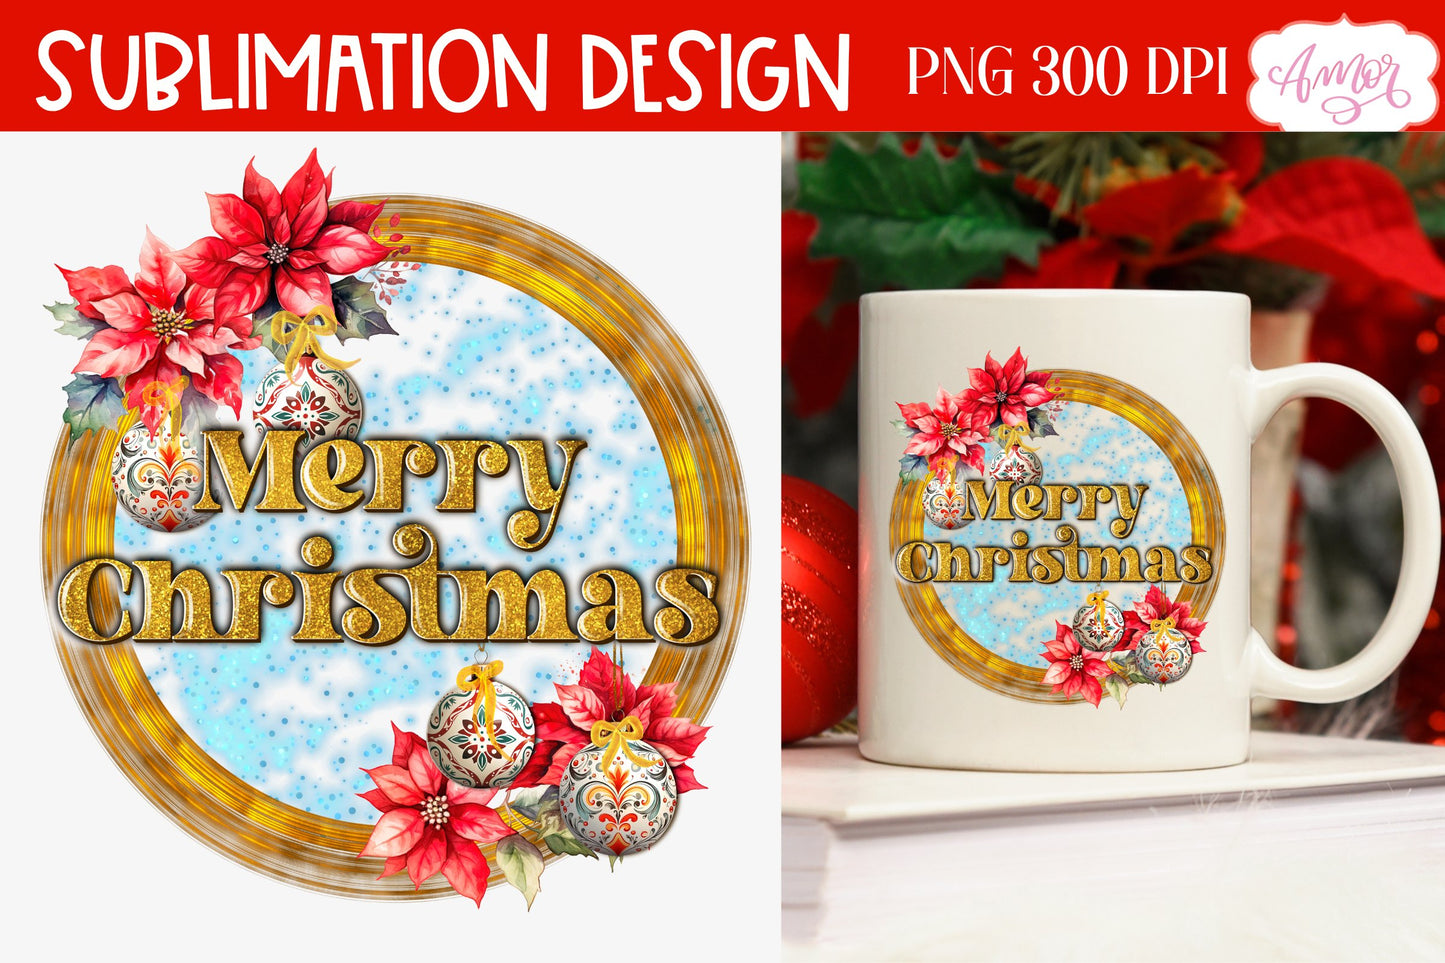 Merry Christmas PNG design for sublimation